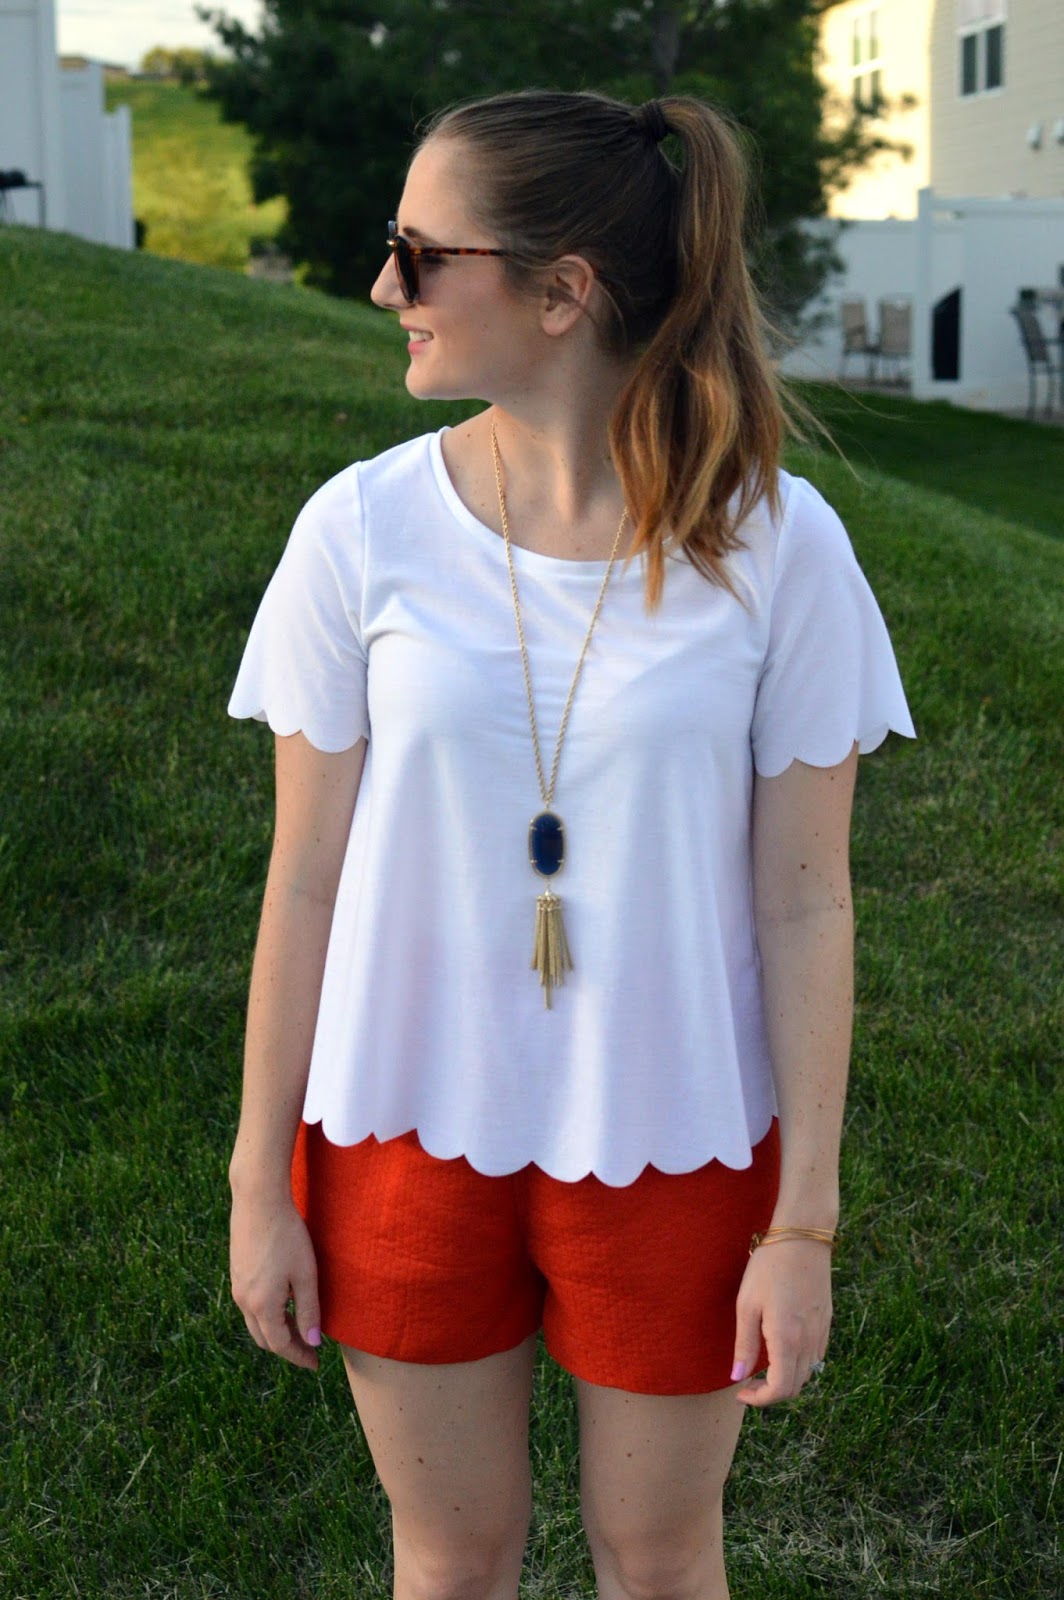 Orange High Waisted Shorts| how to style high waisted shorts | white scalloped top | navy and orange outfit ideas | a memory of us |spring outfits | summer outfits | what to wear this summer